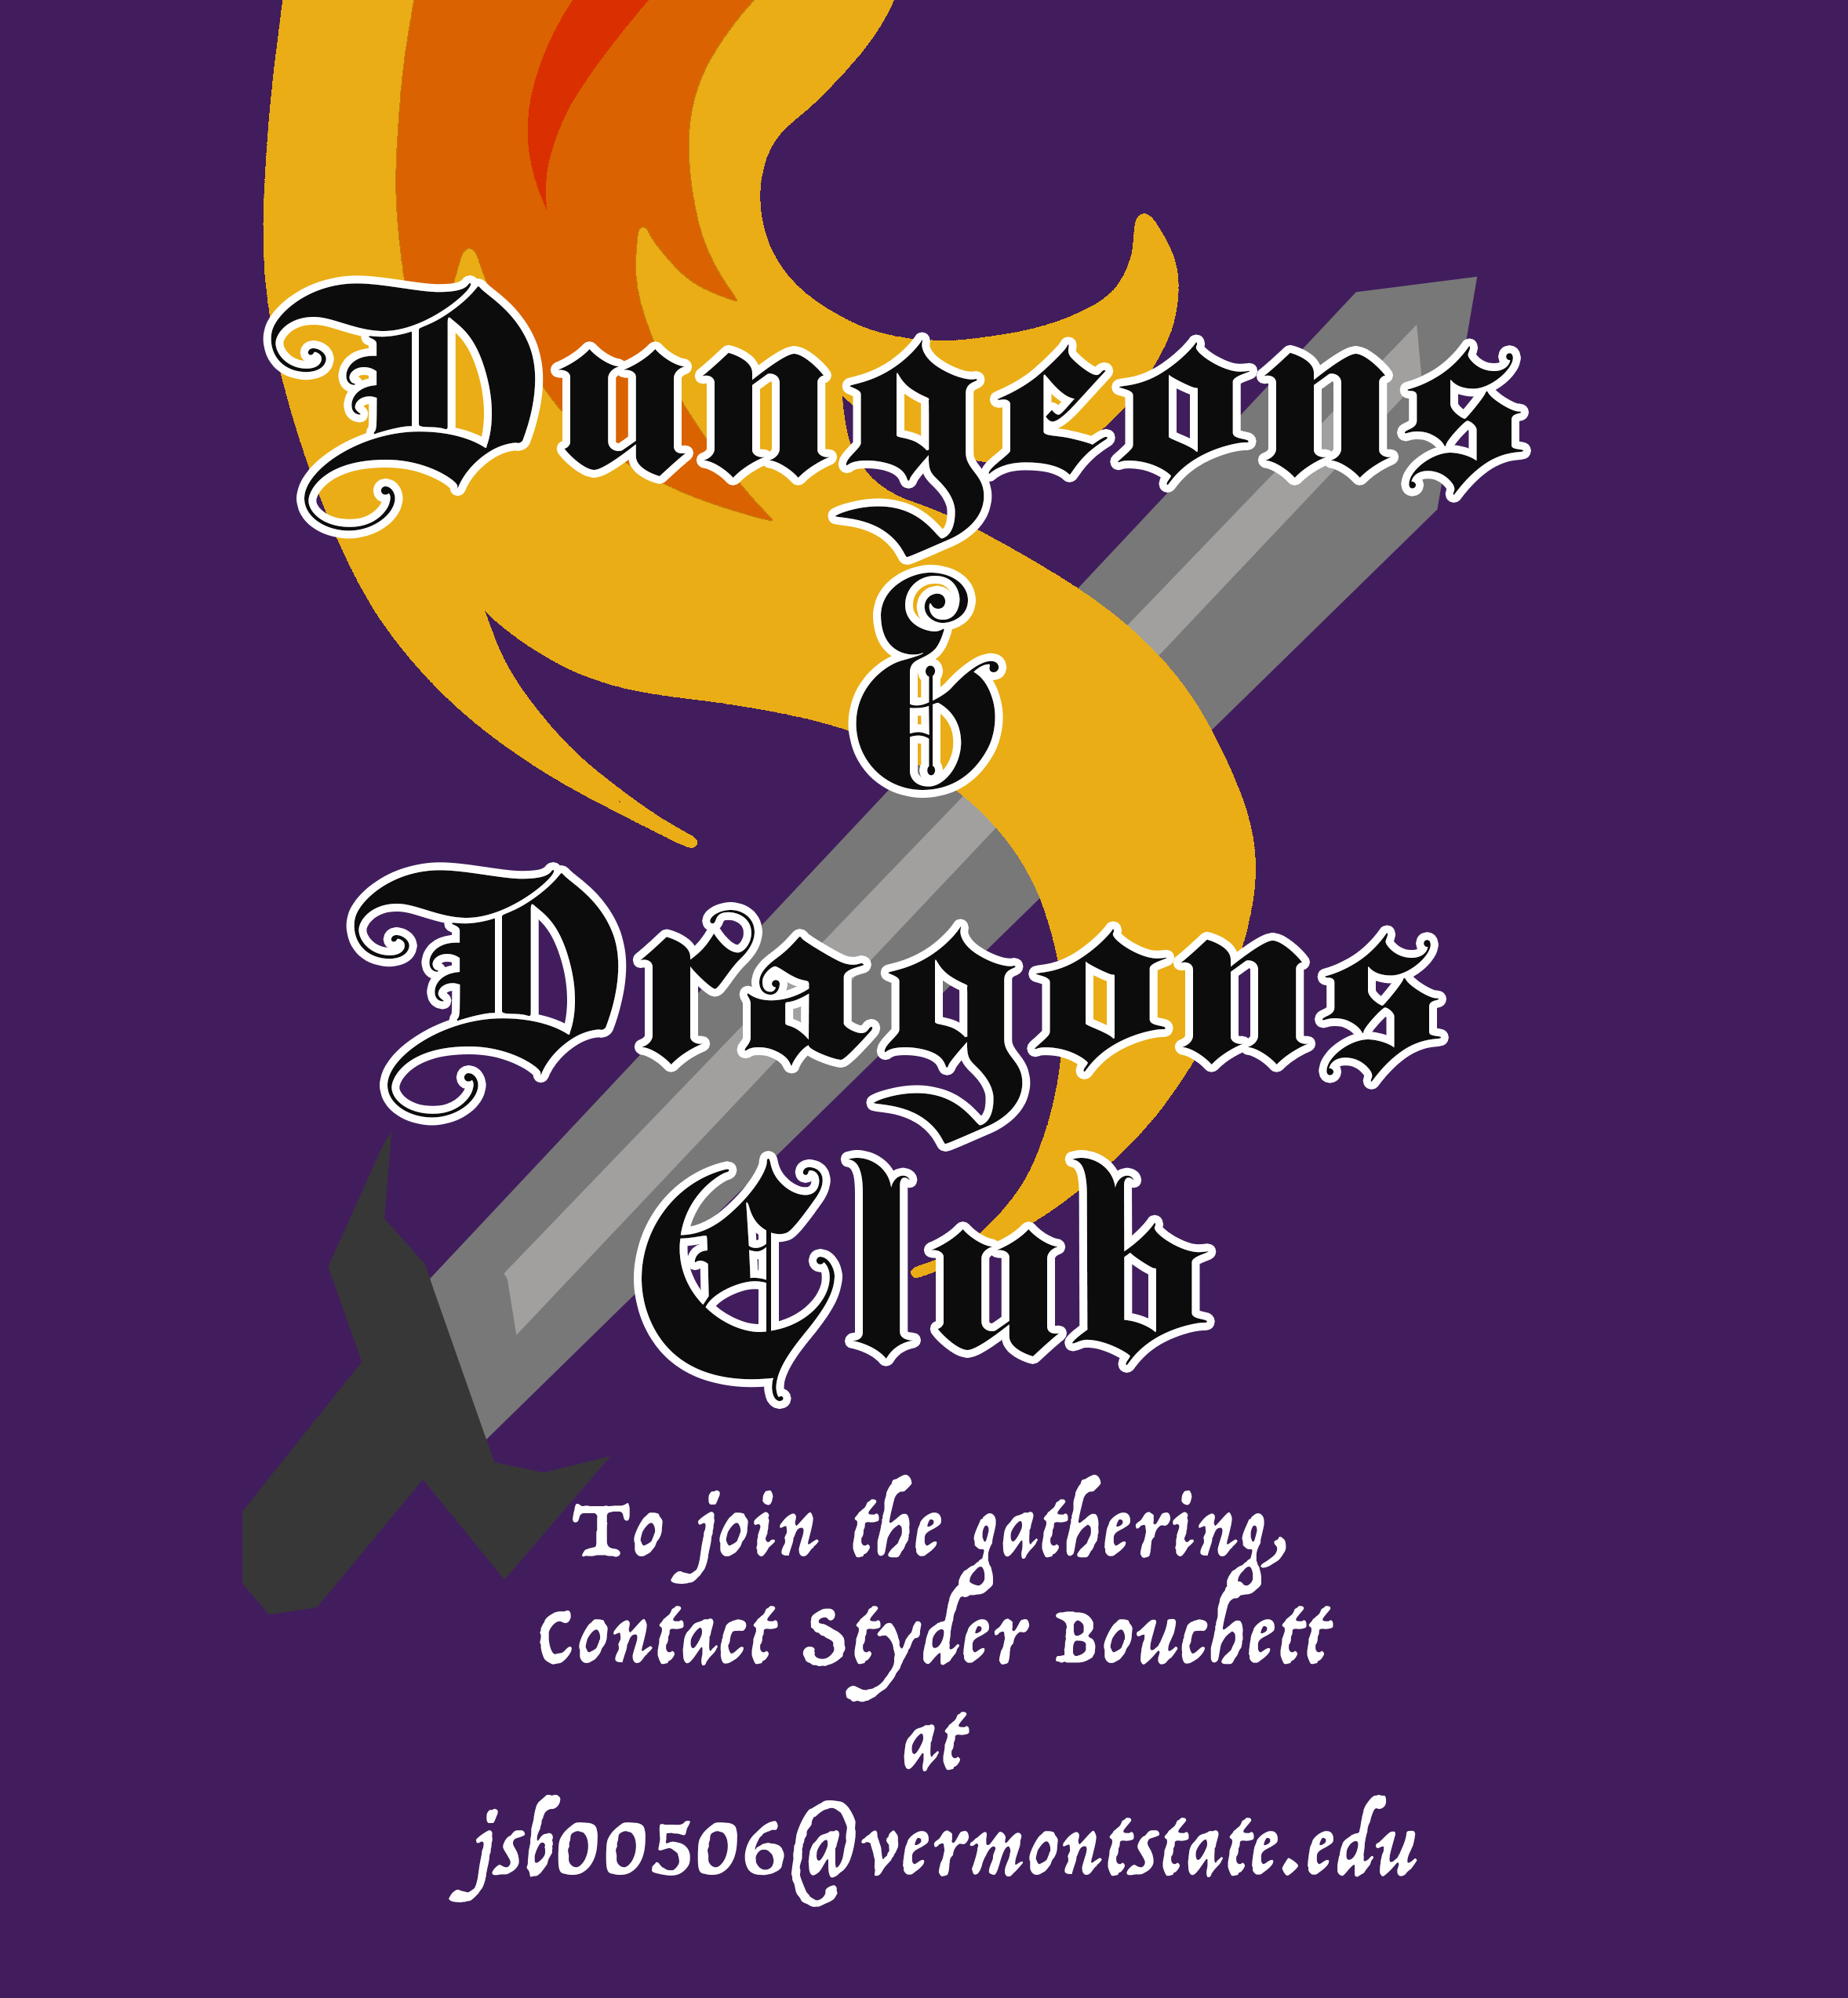 Hail, VTSU Castleton Students!

The Castleton Dungeons & Dragons club beckons; promising tales of heroism, treasure, and glory. 

So, are you ready to contribute your chapter to the annals of greatness?

The Castleton D&D Club welcomes adventurers and travelers of all backgrounds to join us as we embark on daring quests and face the forces of darkness.

From the depths of the darkest dungeons to the soaring heights of the mightiest enchanted castles, the possibilities are endless. Your choices change the very fate of the world. So muster your courage, draw your swords, and prepare to roll initiative.

To reserve your spot at our next gathering and take your place among heroes, contact Stryder Bouchett at jsb00506@vermontstate.edu. 

We hope to see you at the table, but until then, may your dice be blessed and your rolls be true!